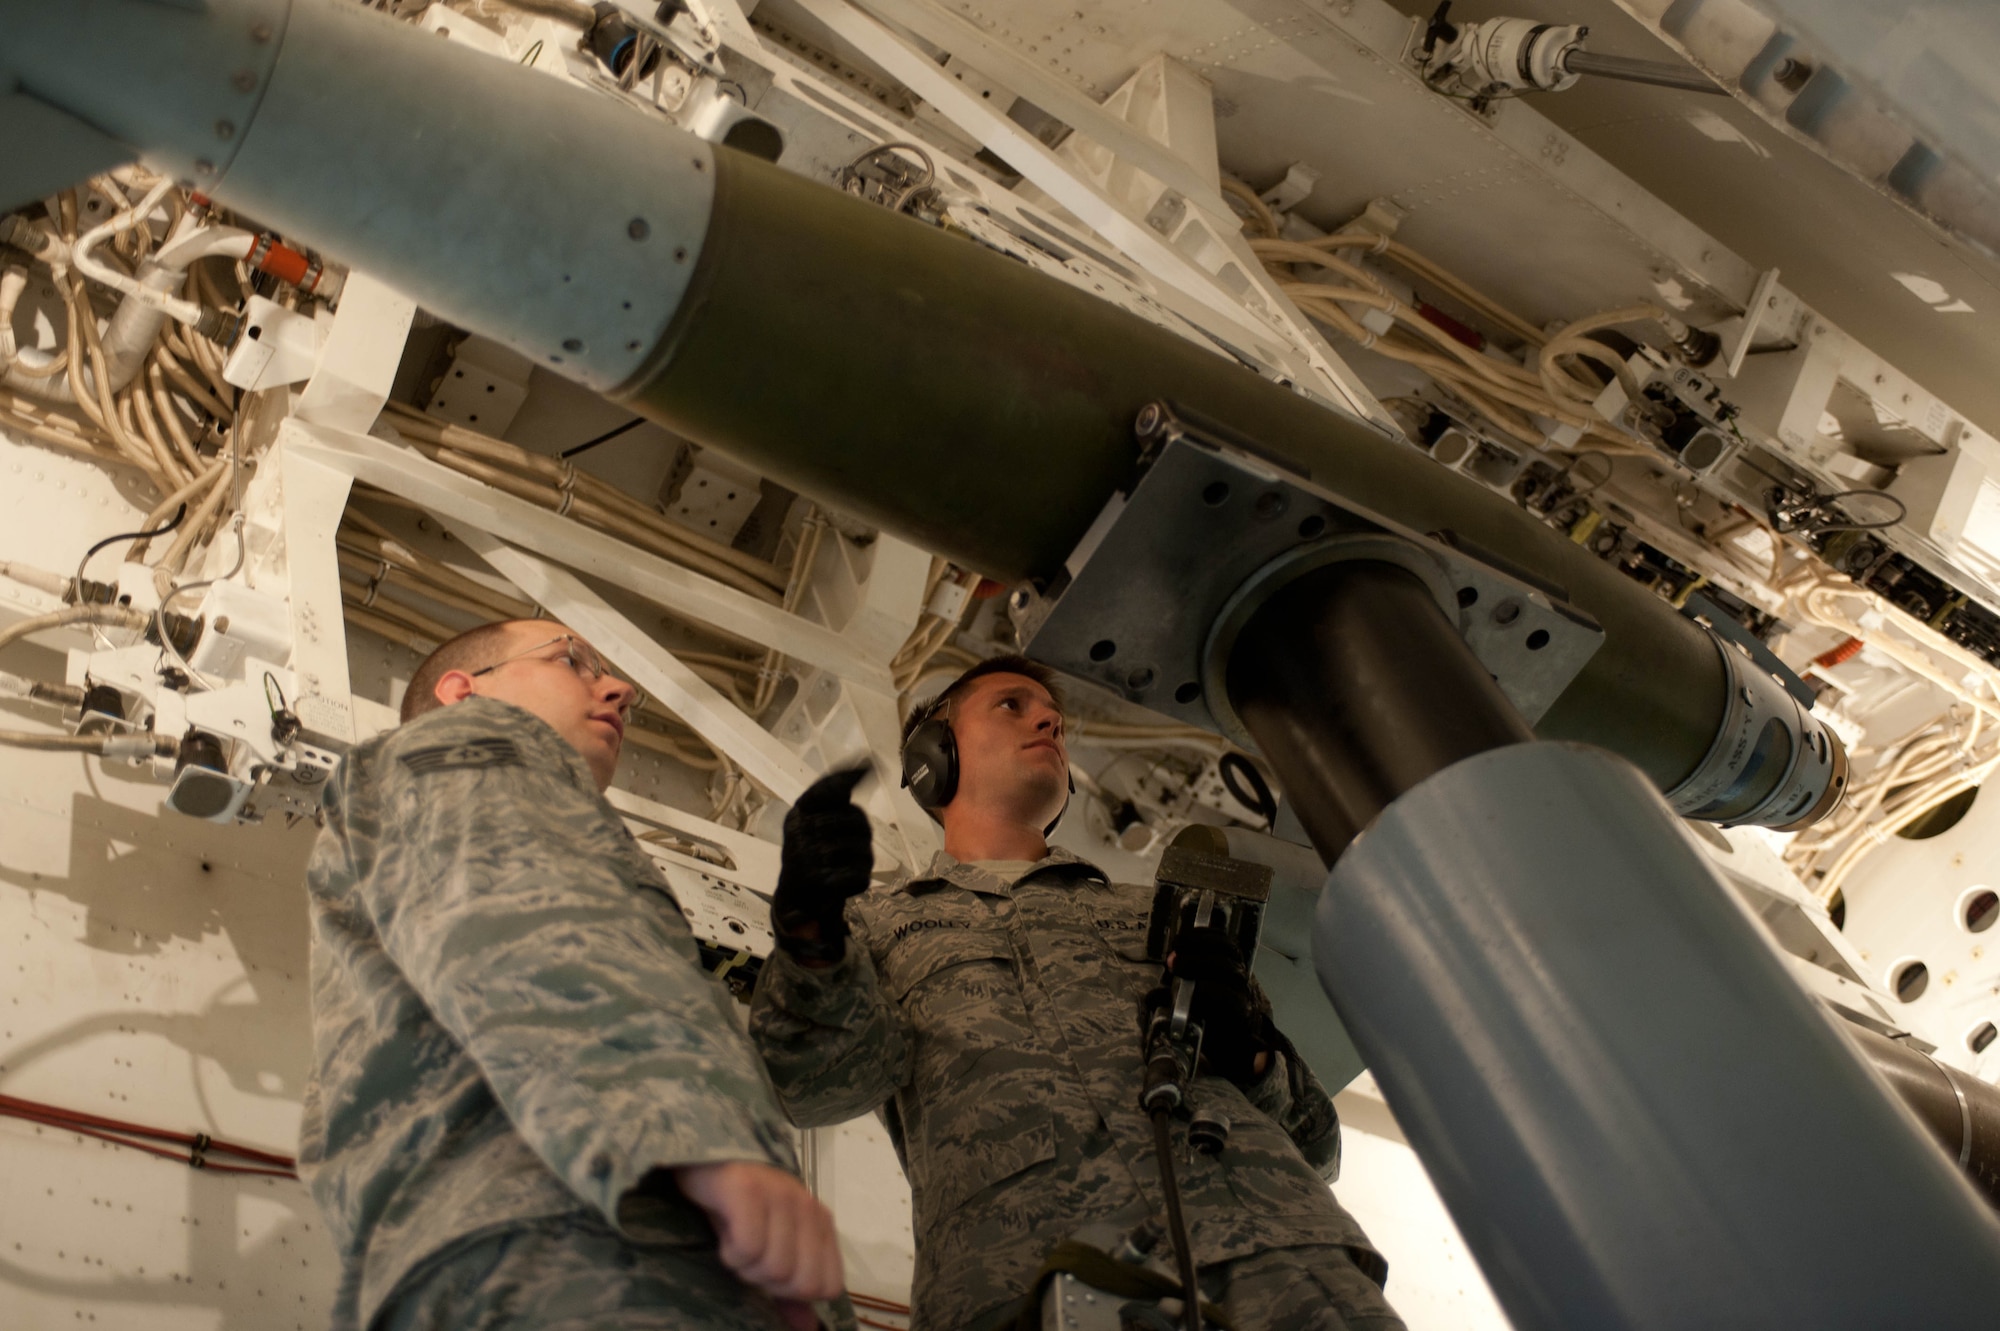 Staff Sgts. Adam Borton (left) and Ryan Wooley, 28th Aircraft Maintenance Squadron weapons load crew members, secure an inert guided bomb unit in a mock B-1 bomber simulator during training at Ellsworth Air Force Base, S.D., Aug. 13, 2013. In addition to initial training, all weapons loaders are evaluated monthly to ensure that they maintain qualification and proficiency in the handling and transportation of munitions. (U.S. Air Force photo by Airman 1st Class Zachary Hada/Released)